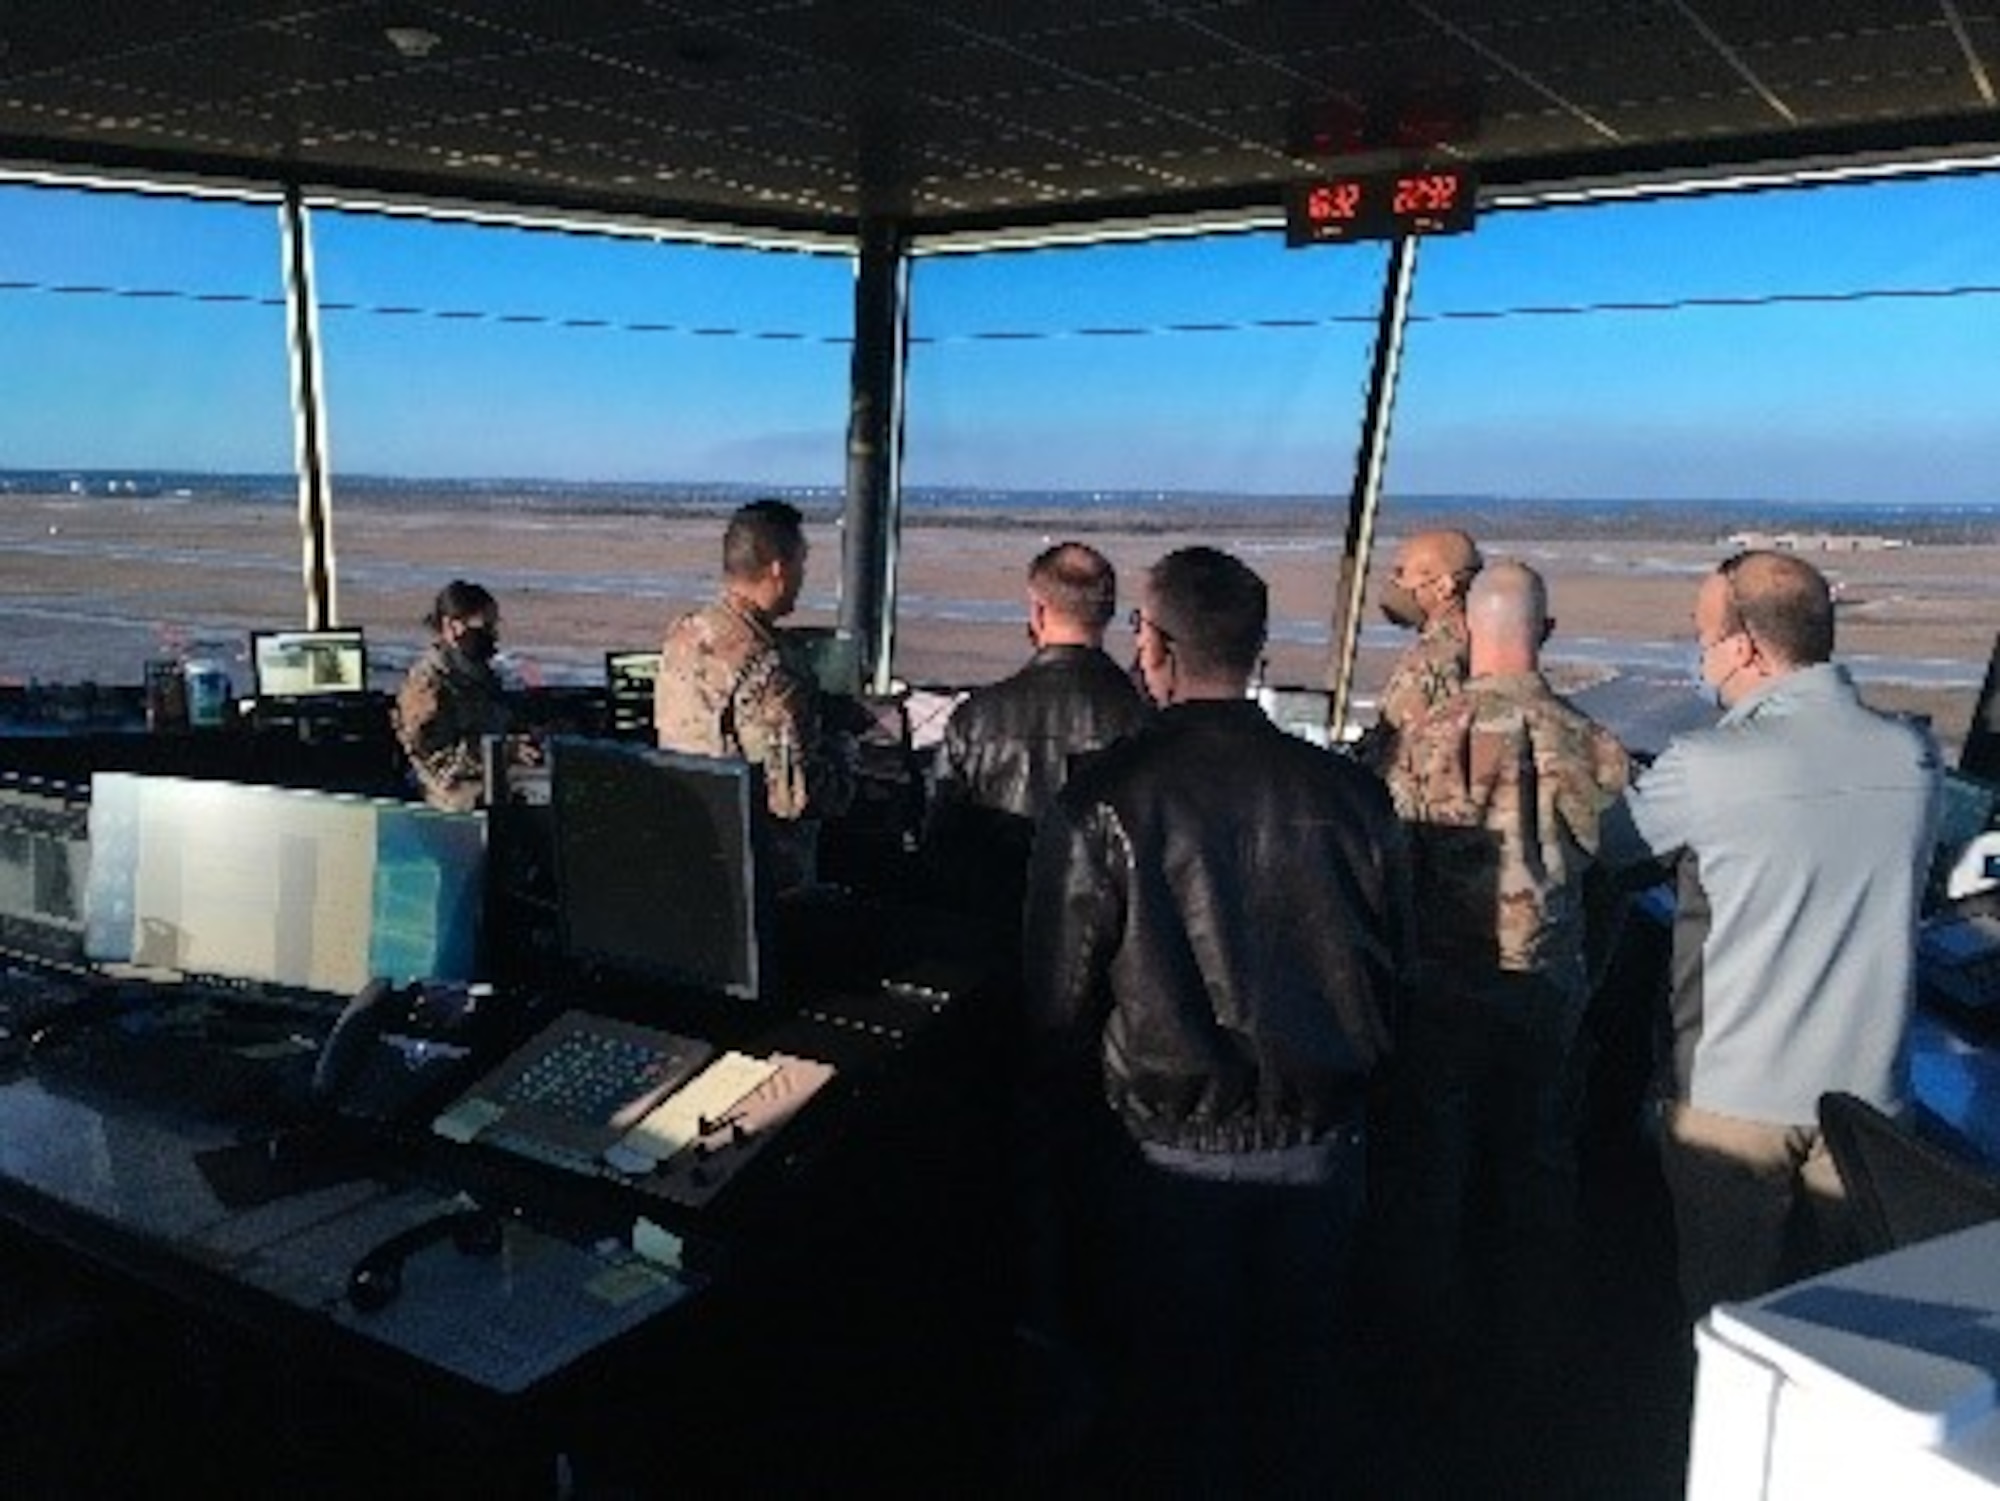 Flightline of the Future Summit attendees got a bird’s eye view of the flightline from Tyndall’s air traffic control tower yesterday. They discussed flight operations, its challenges and how best to improve operations with air traffic controllers. (U.S. Air Force photo by Donald Arias)